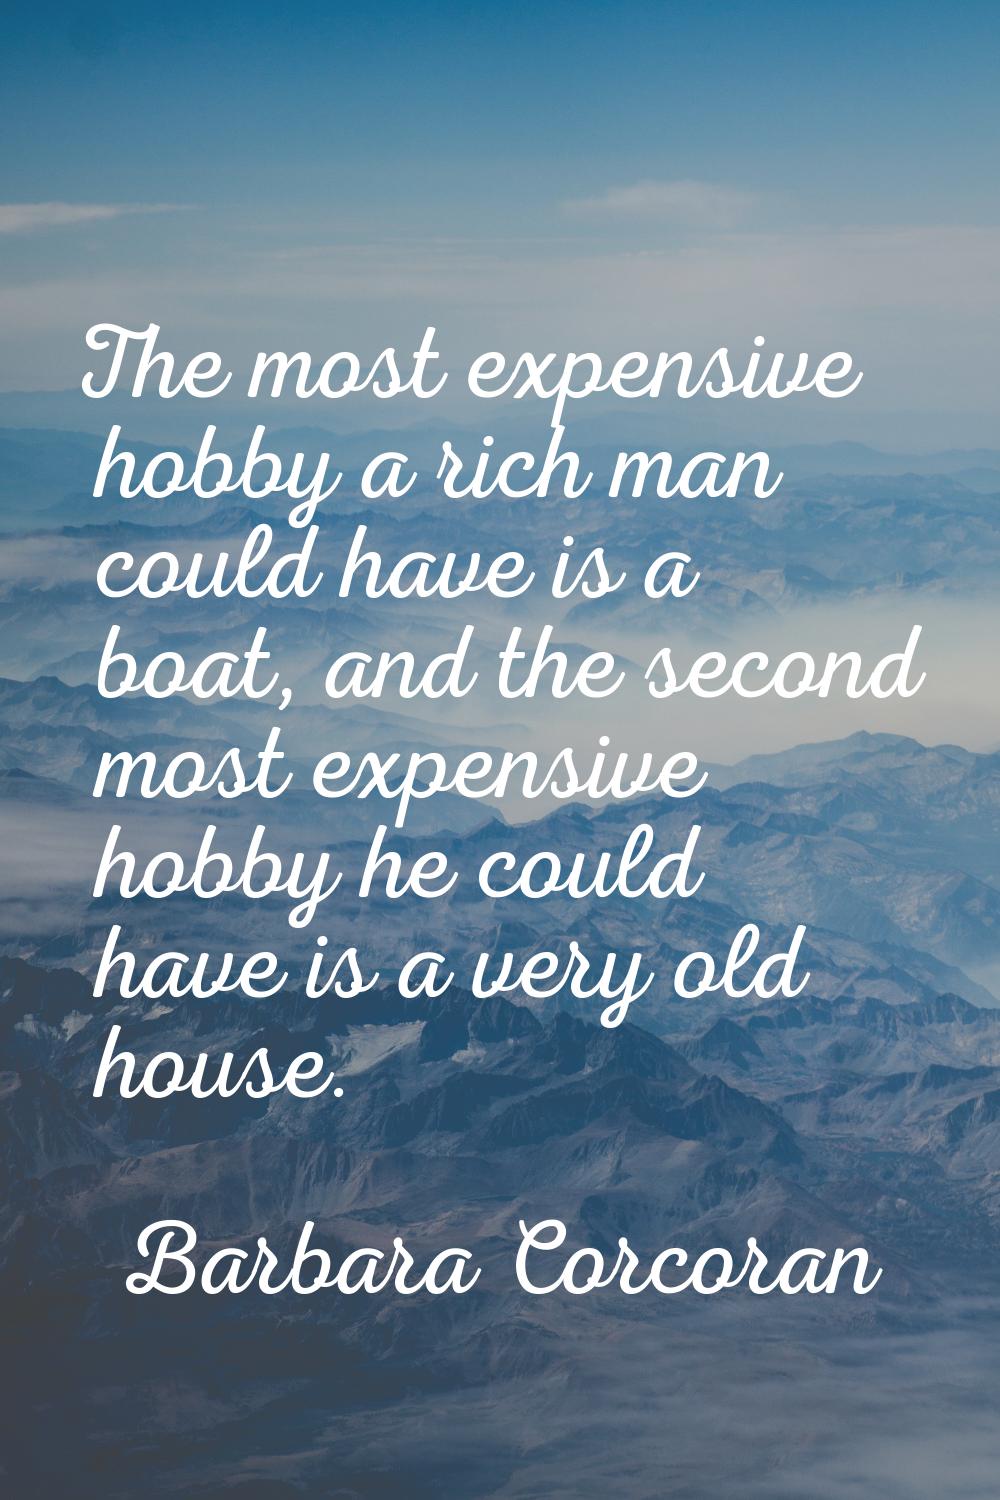 The most expensive hobby a rich man could have is a boat, and the second most expensive hobby he co